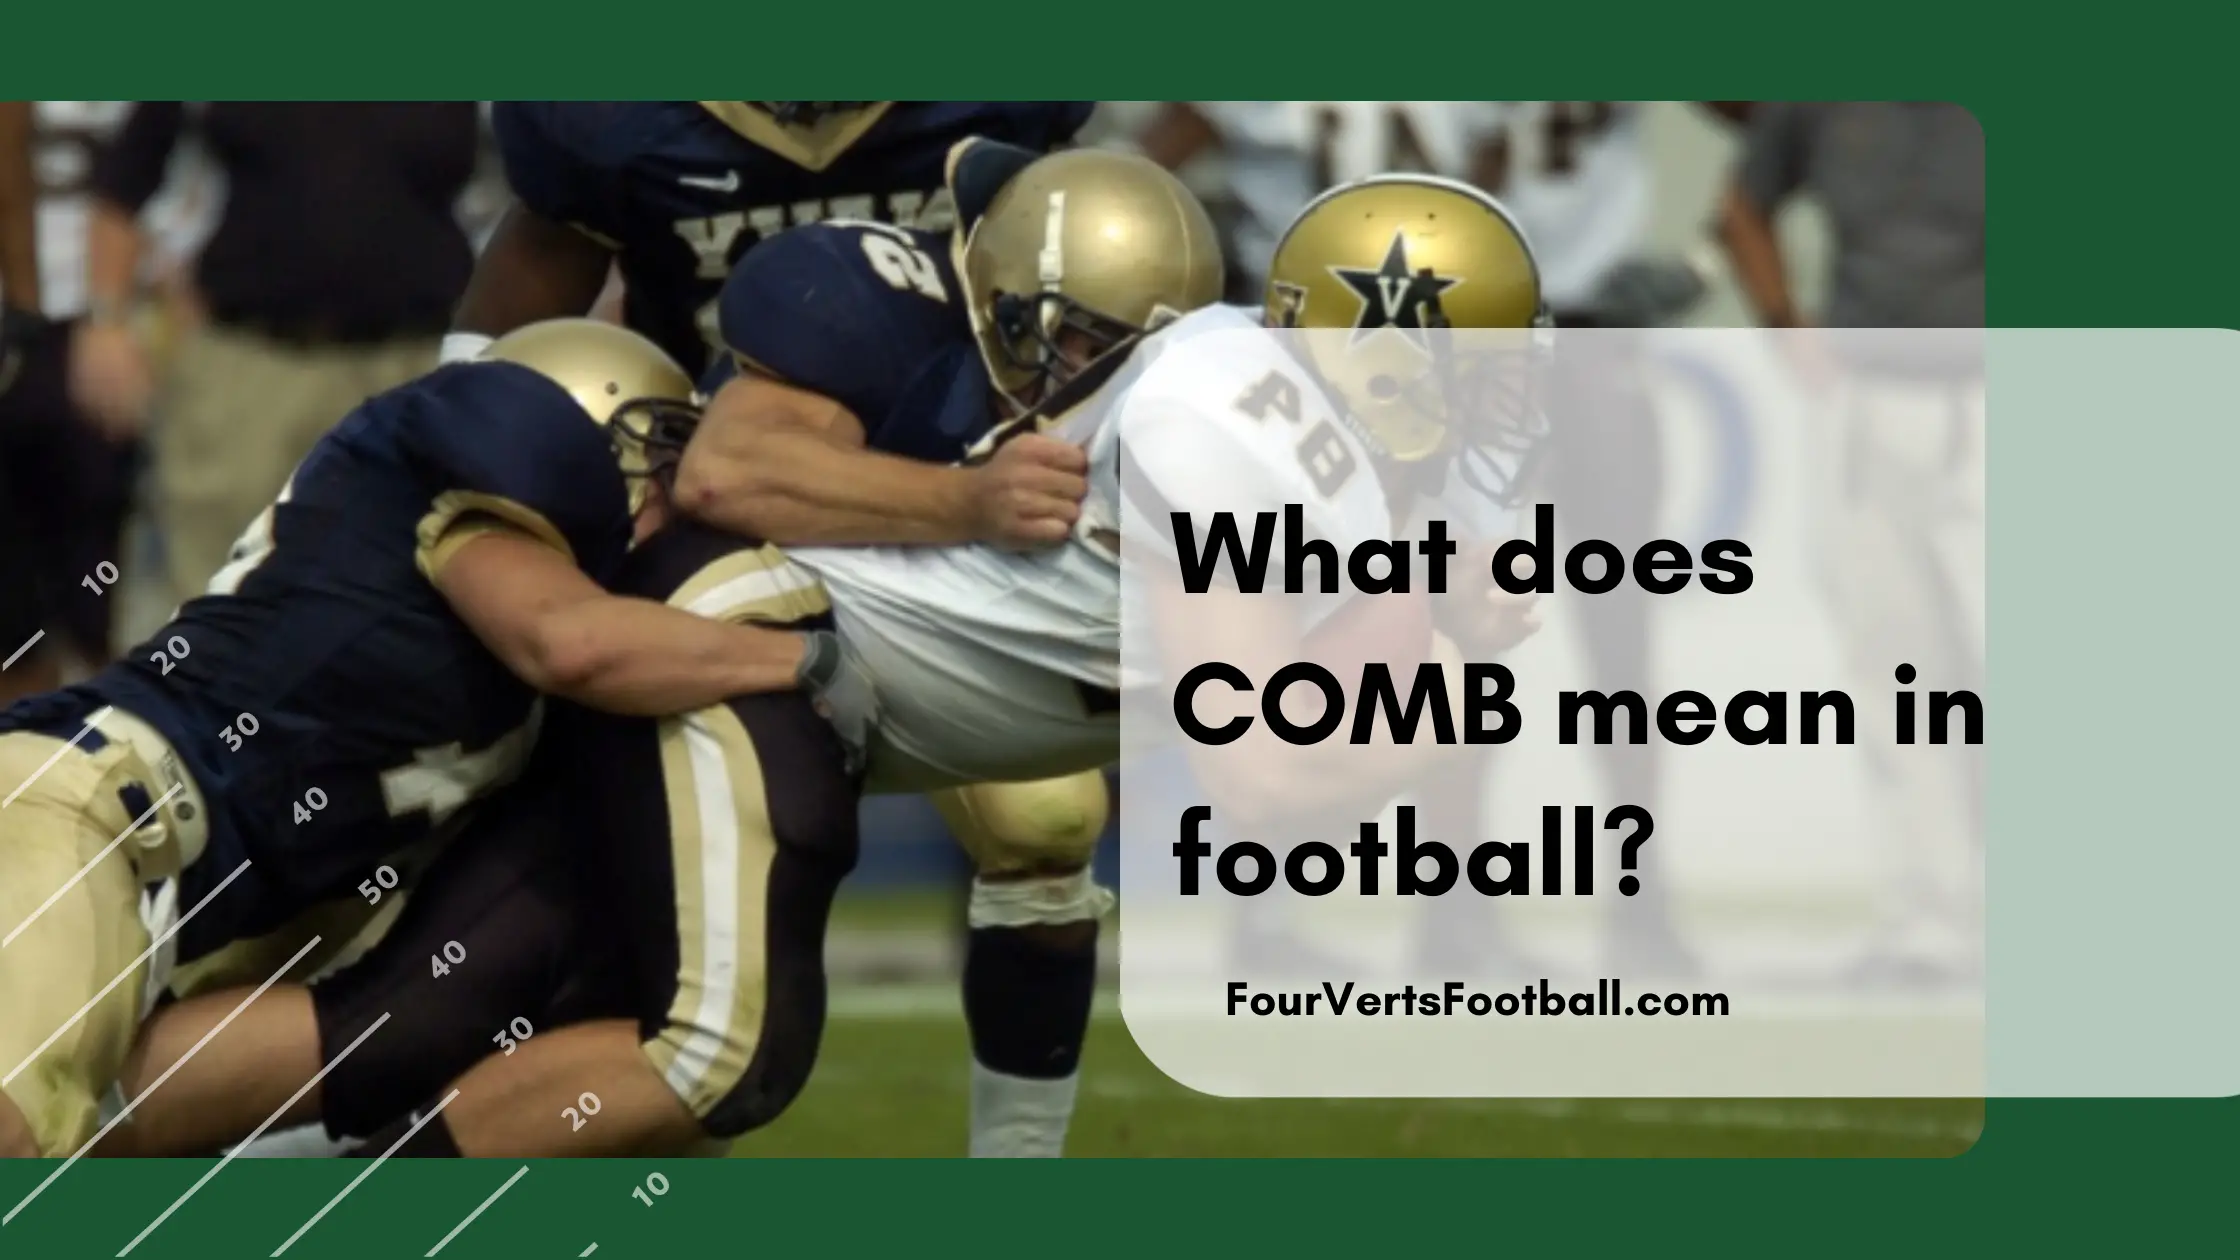 What Does COMB Mean In Football Statistics